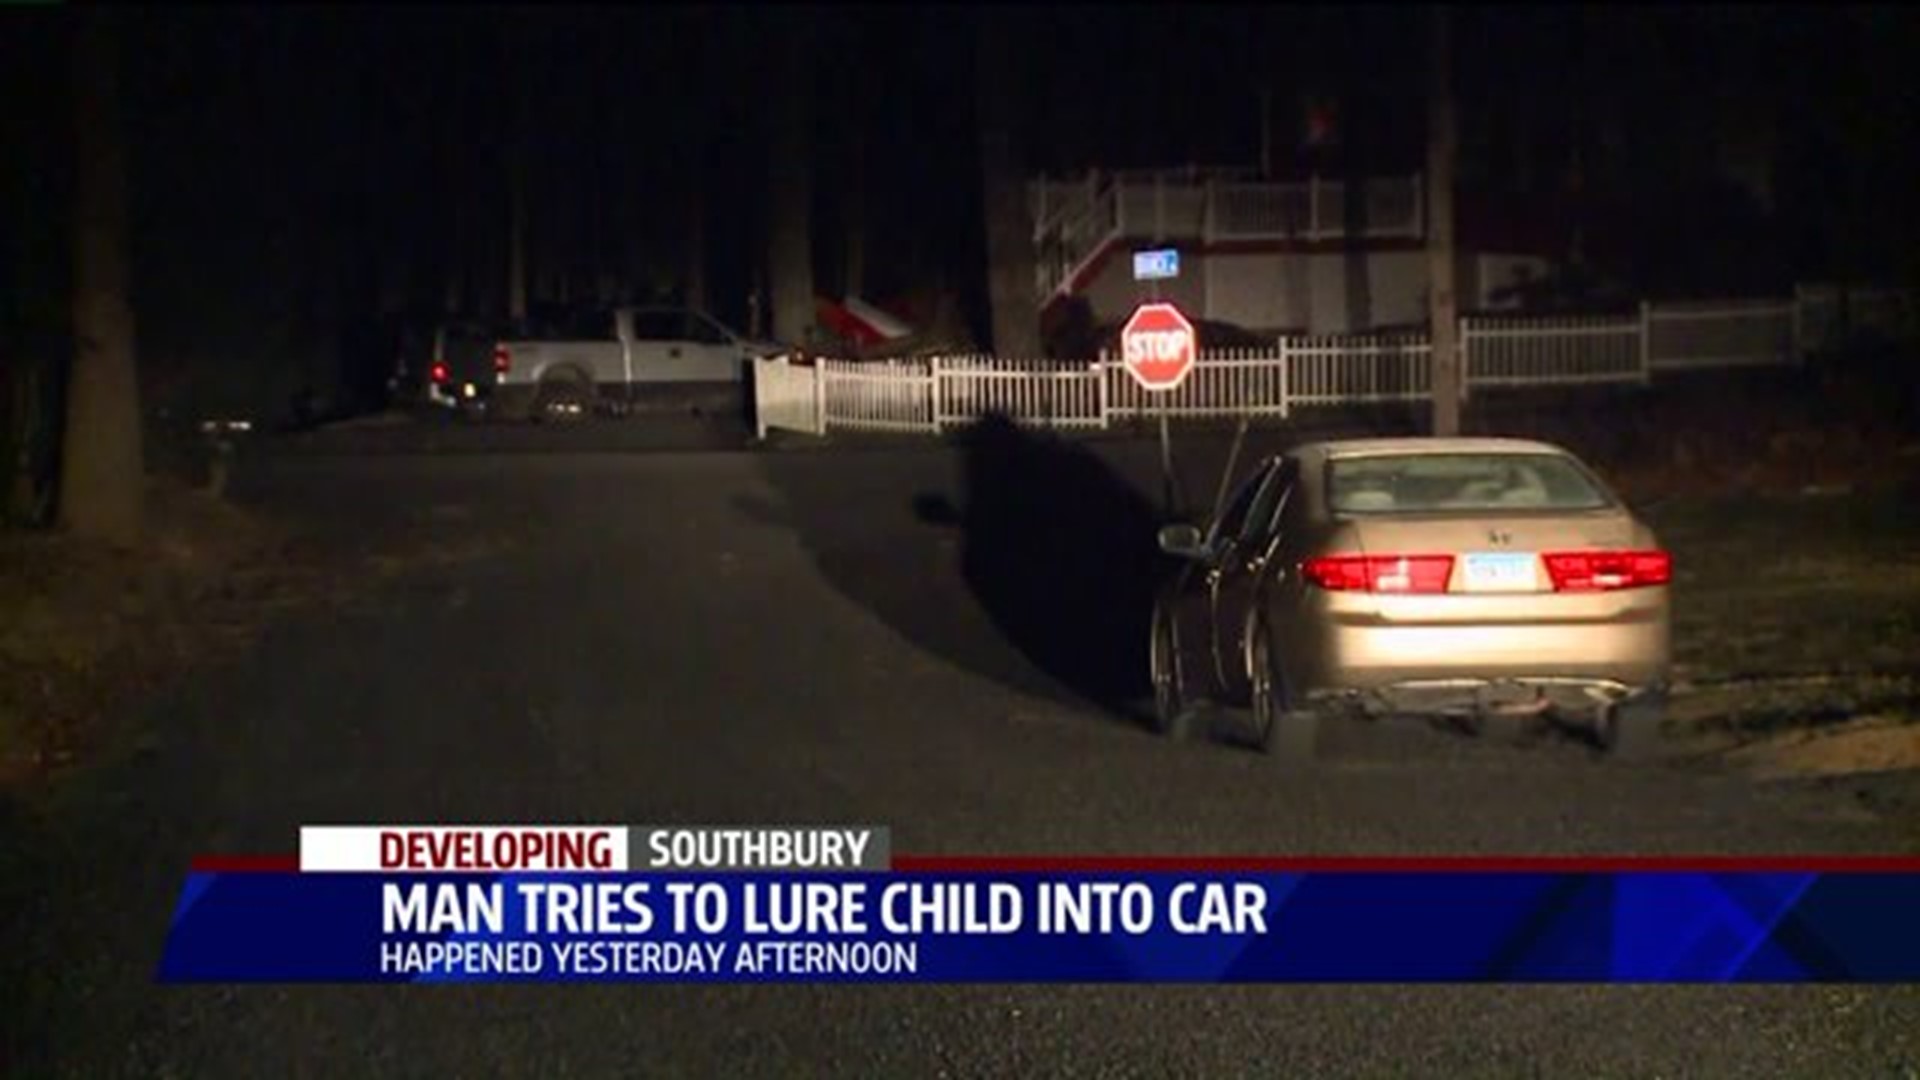 Police investigating report of a man trying to lure children into car in Southbury